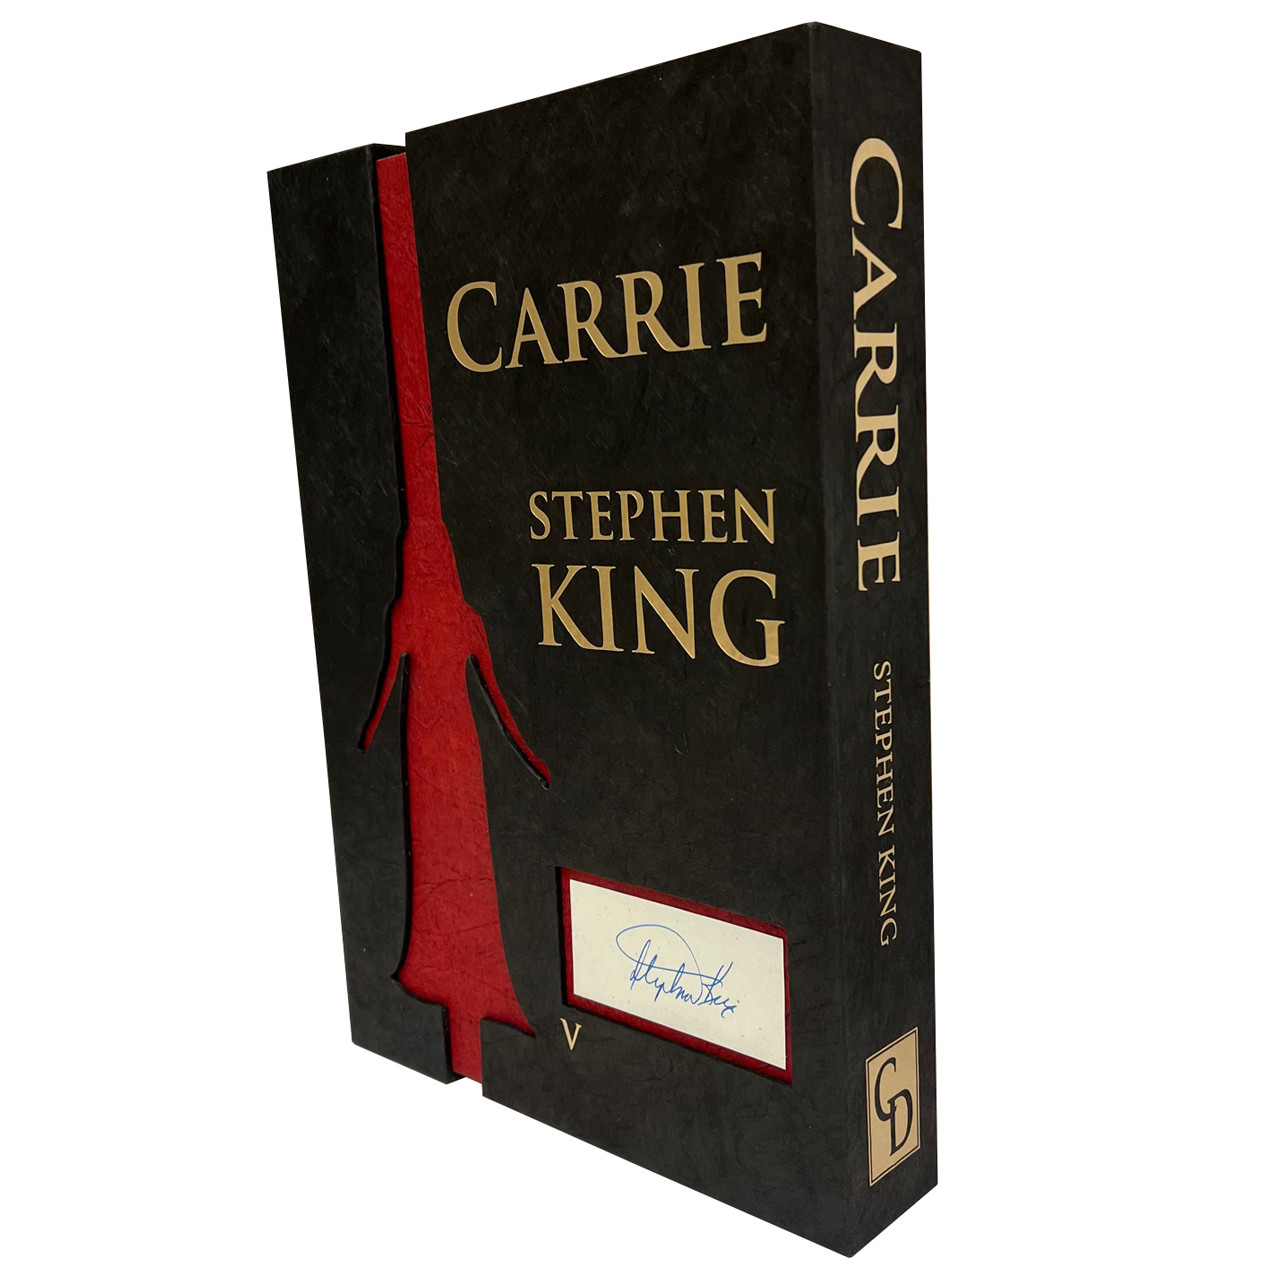 Stephen King “Carrie” Slipcased Signed Roman Numeral Edition "V", Remarqued w/COA